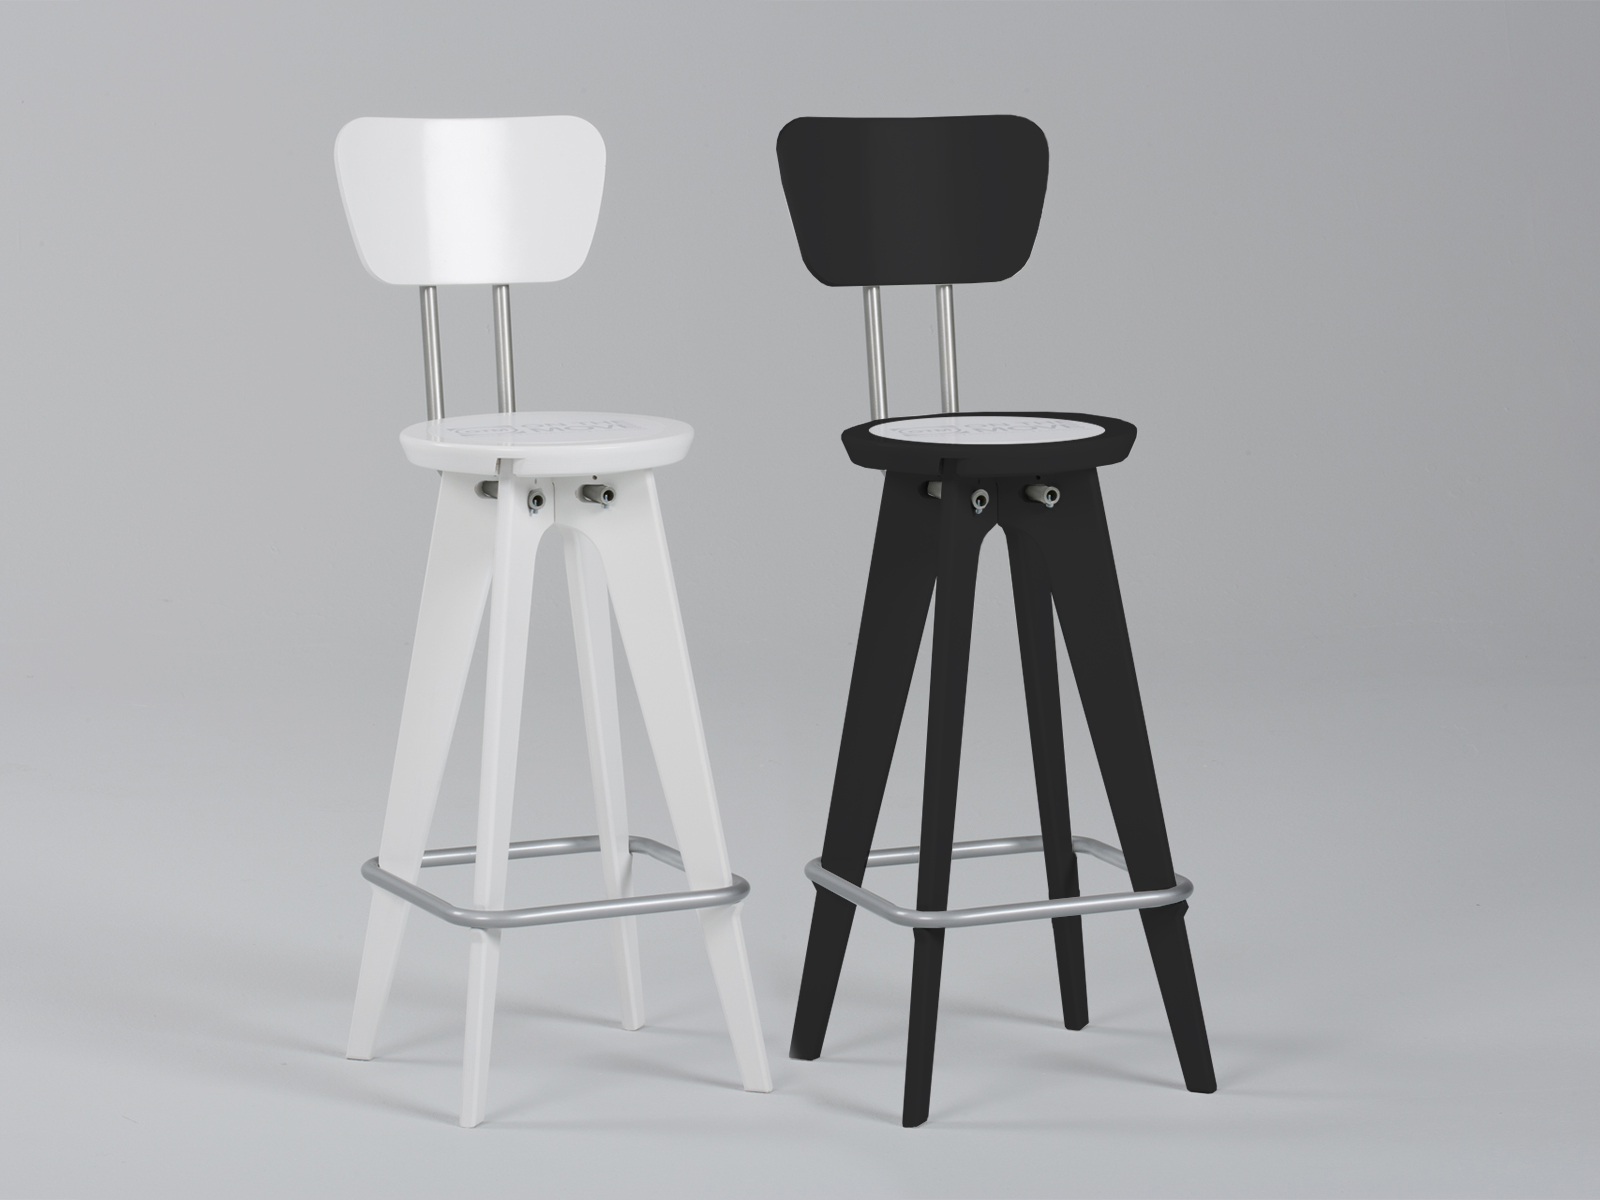 Chairs with Seatback Option -- Add $284 per Chair (white and black only)